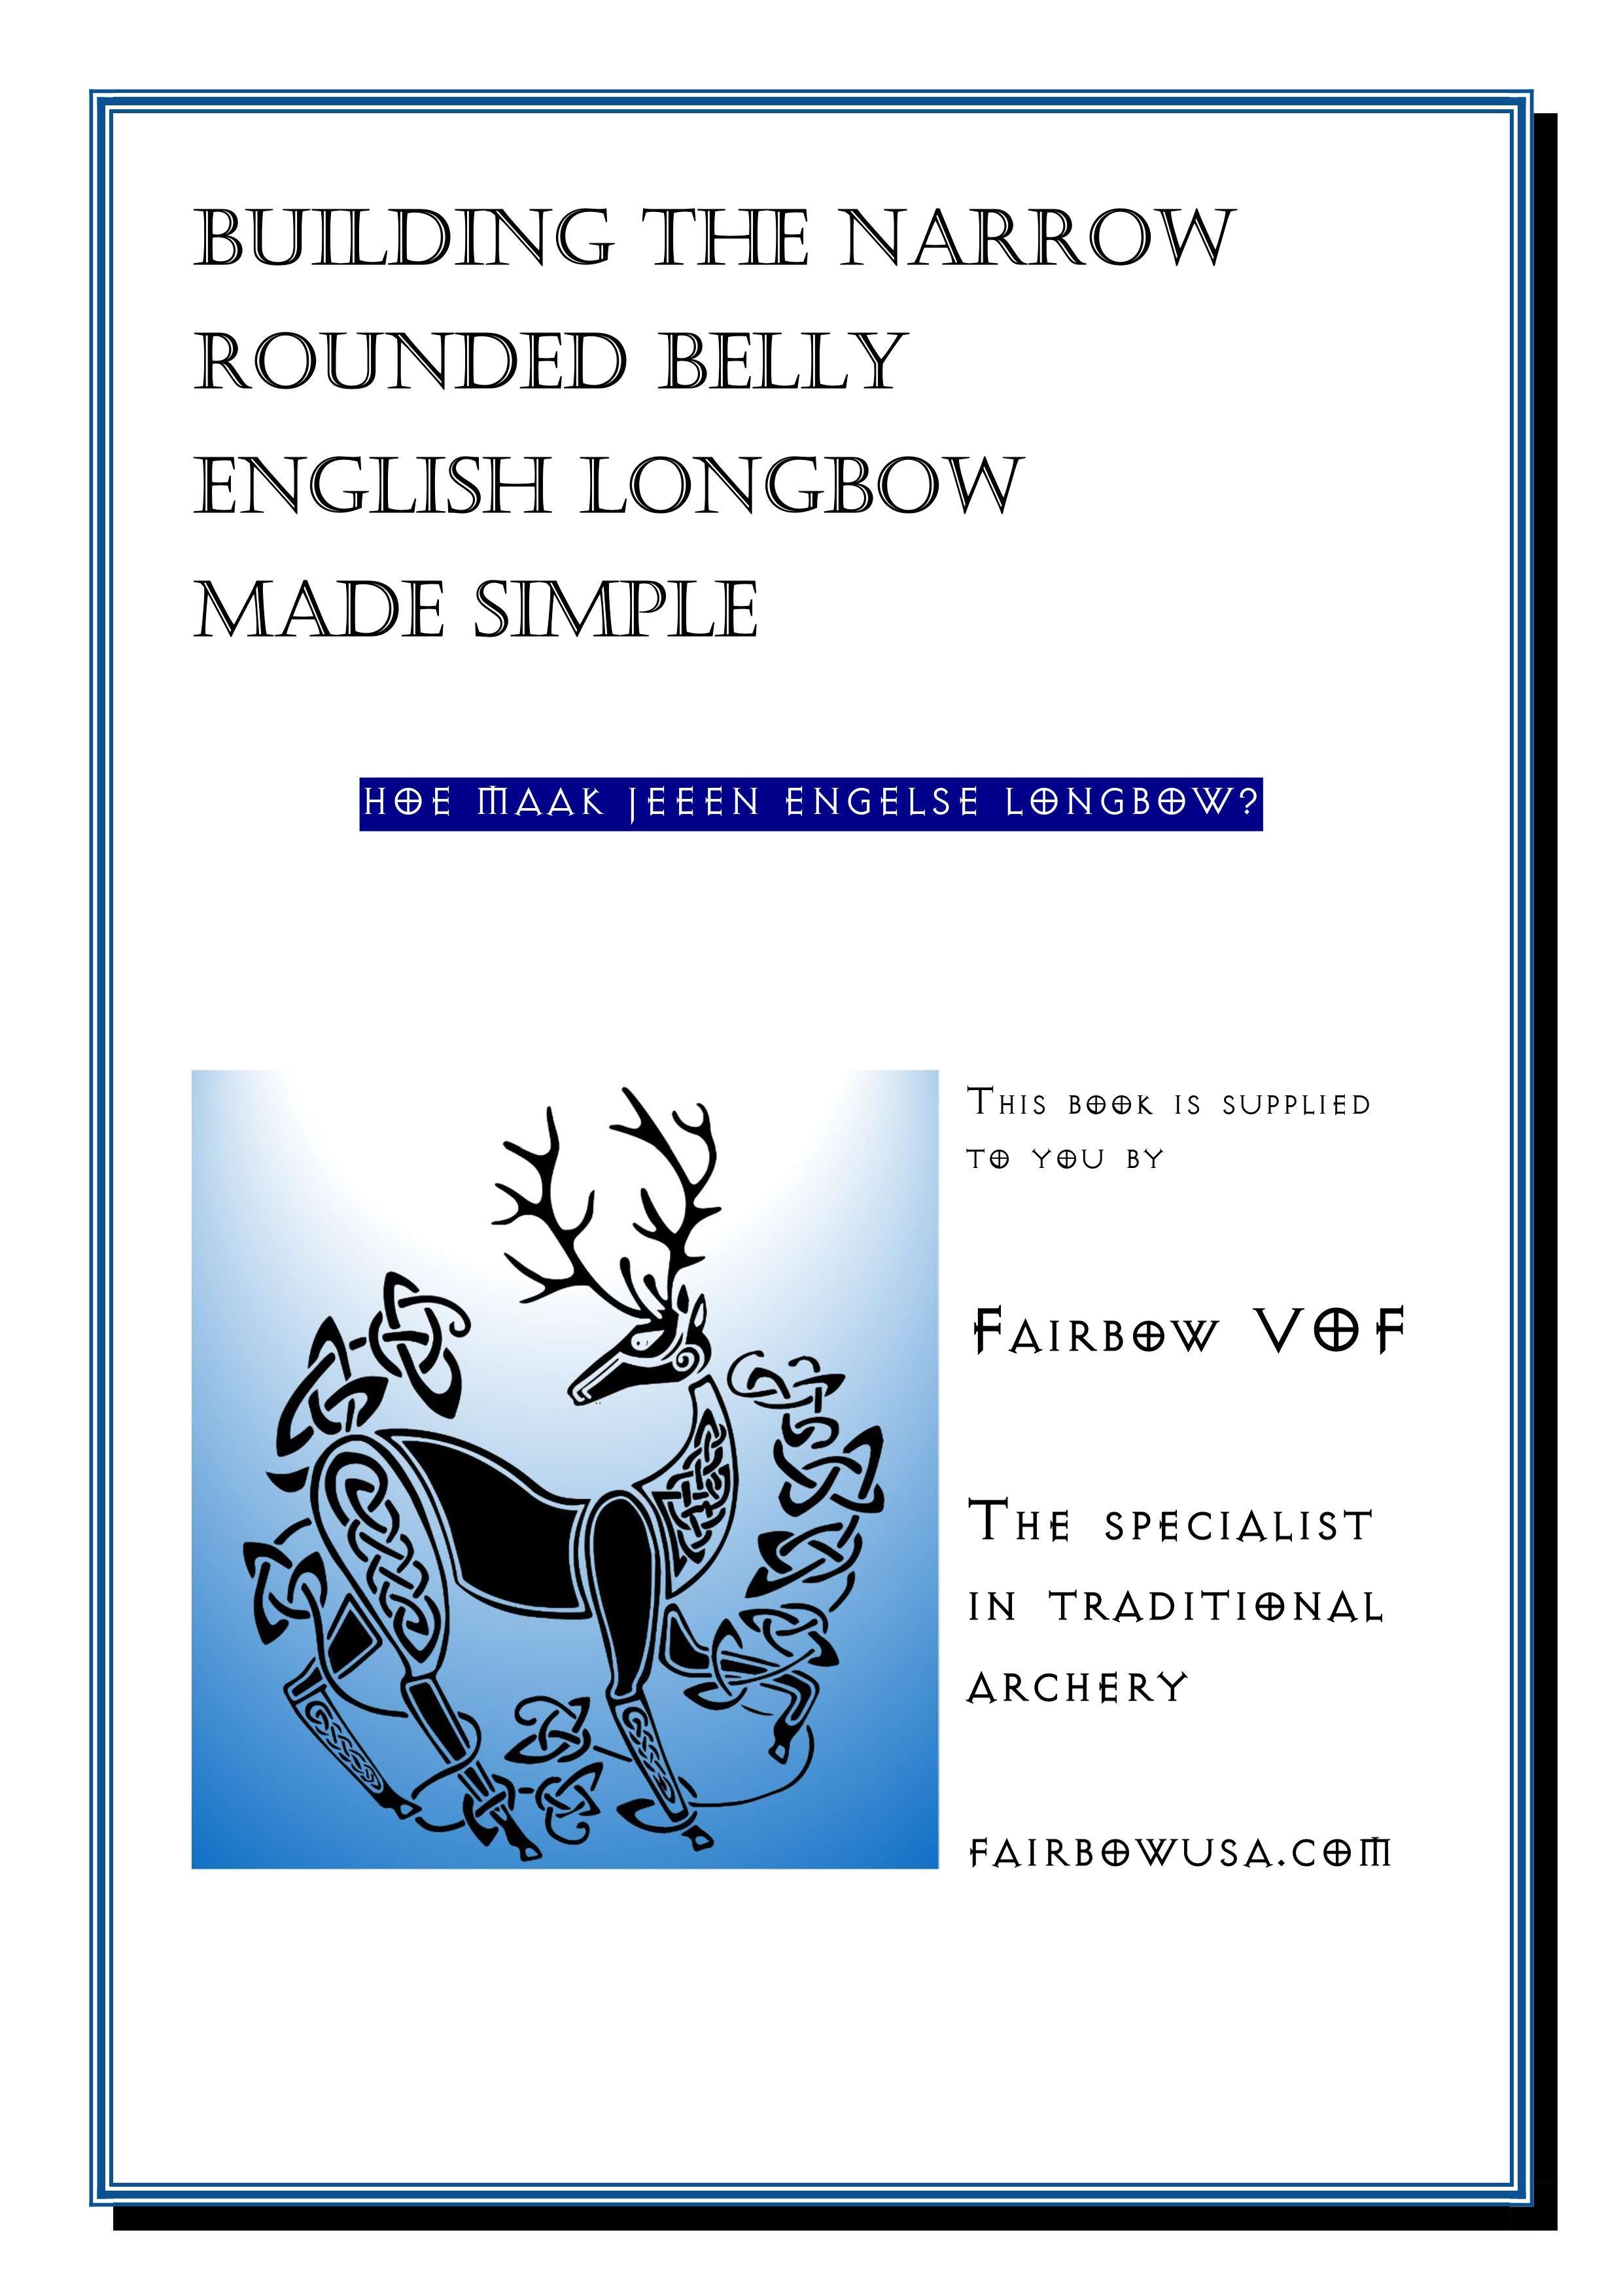 NARROW ENGLISH LONG BOW BUILDING INSTRUCTIONS MADE SIMPLE-Book-Fairbow-English-Fairbow